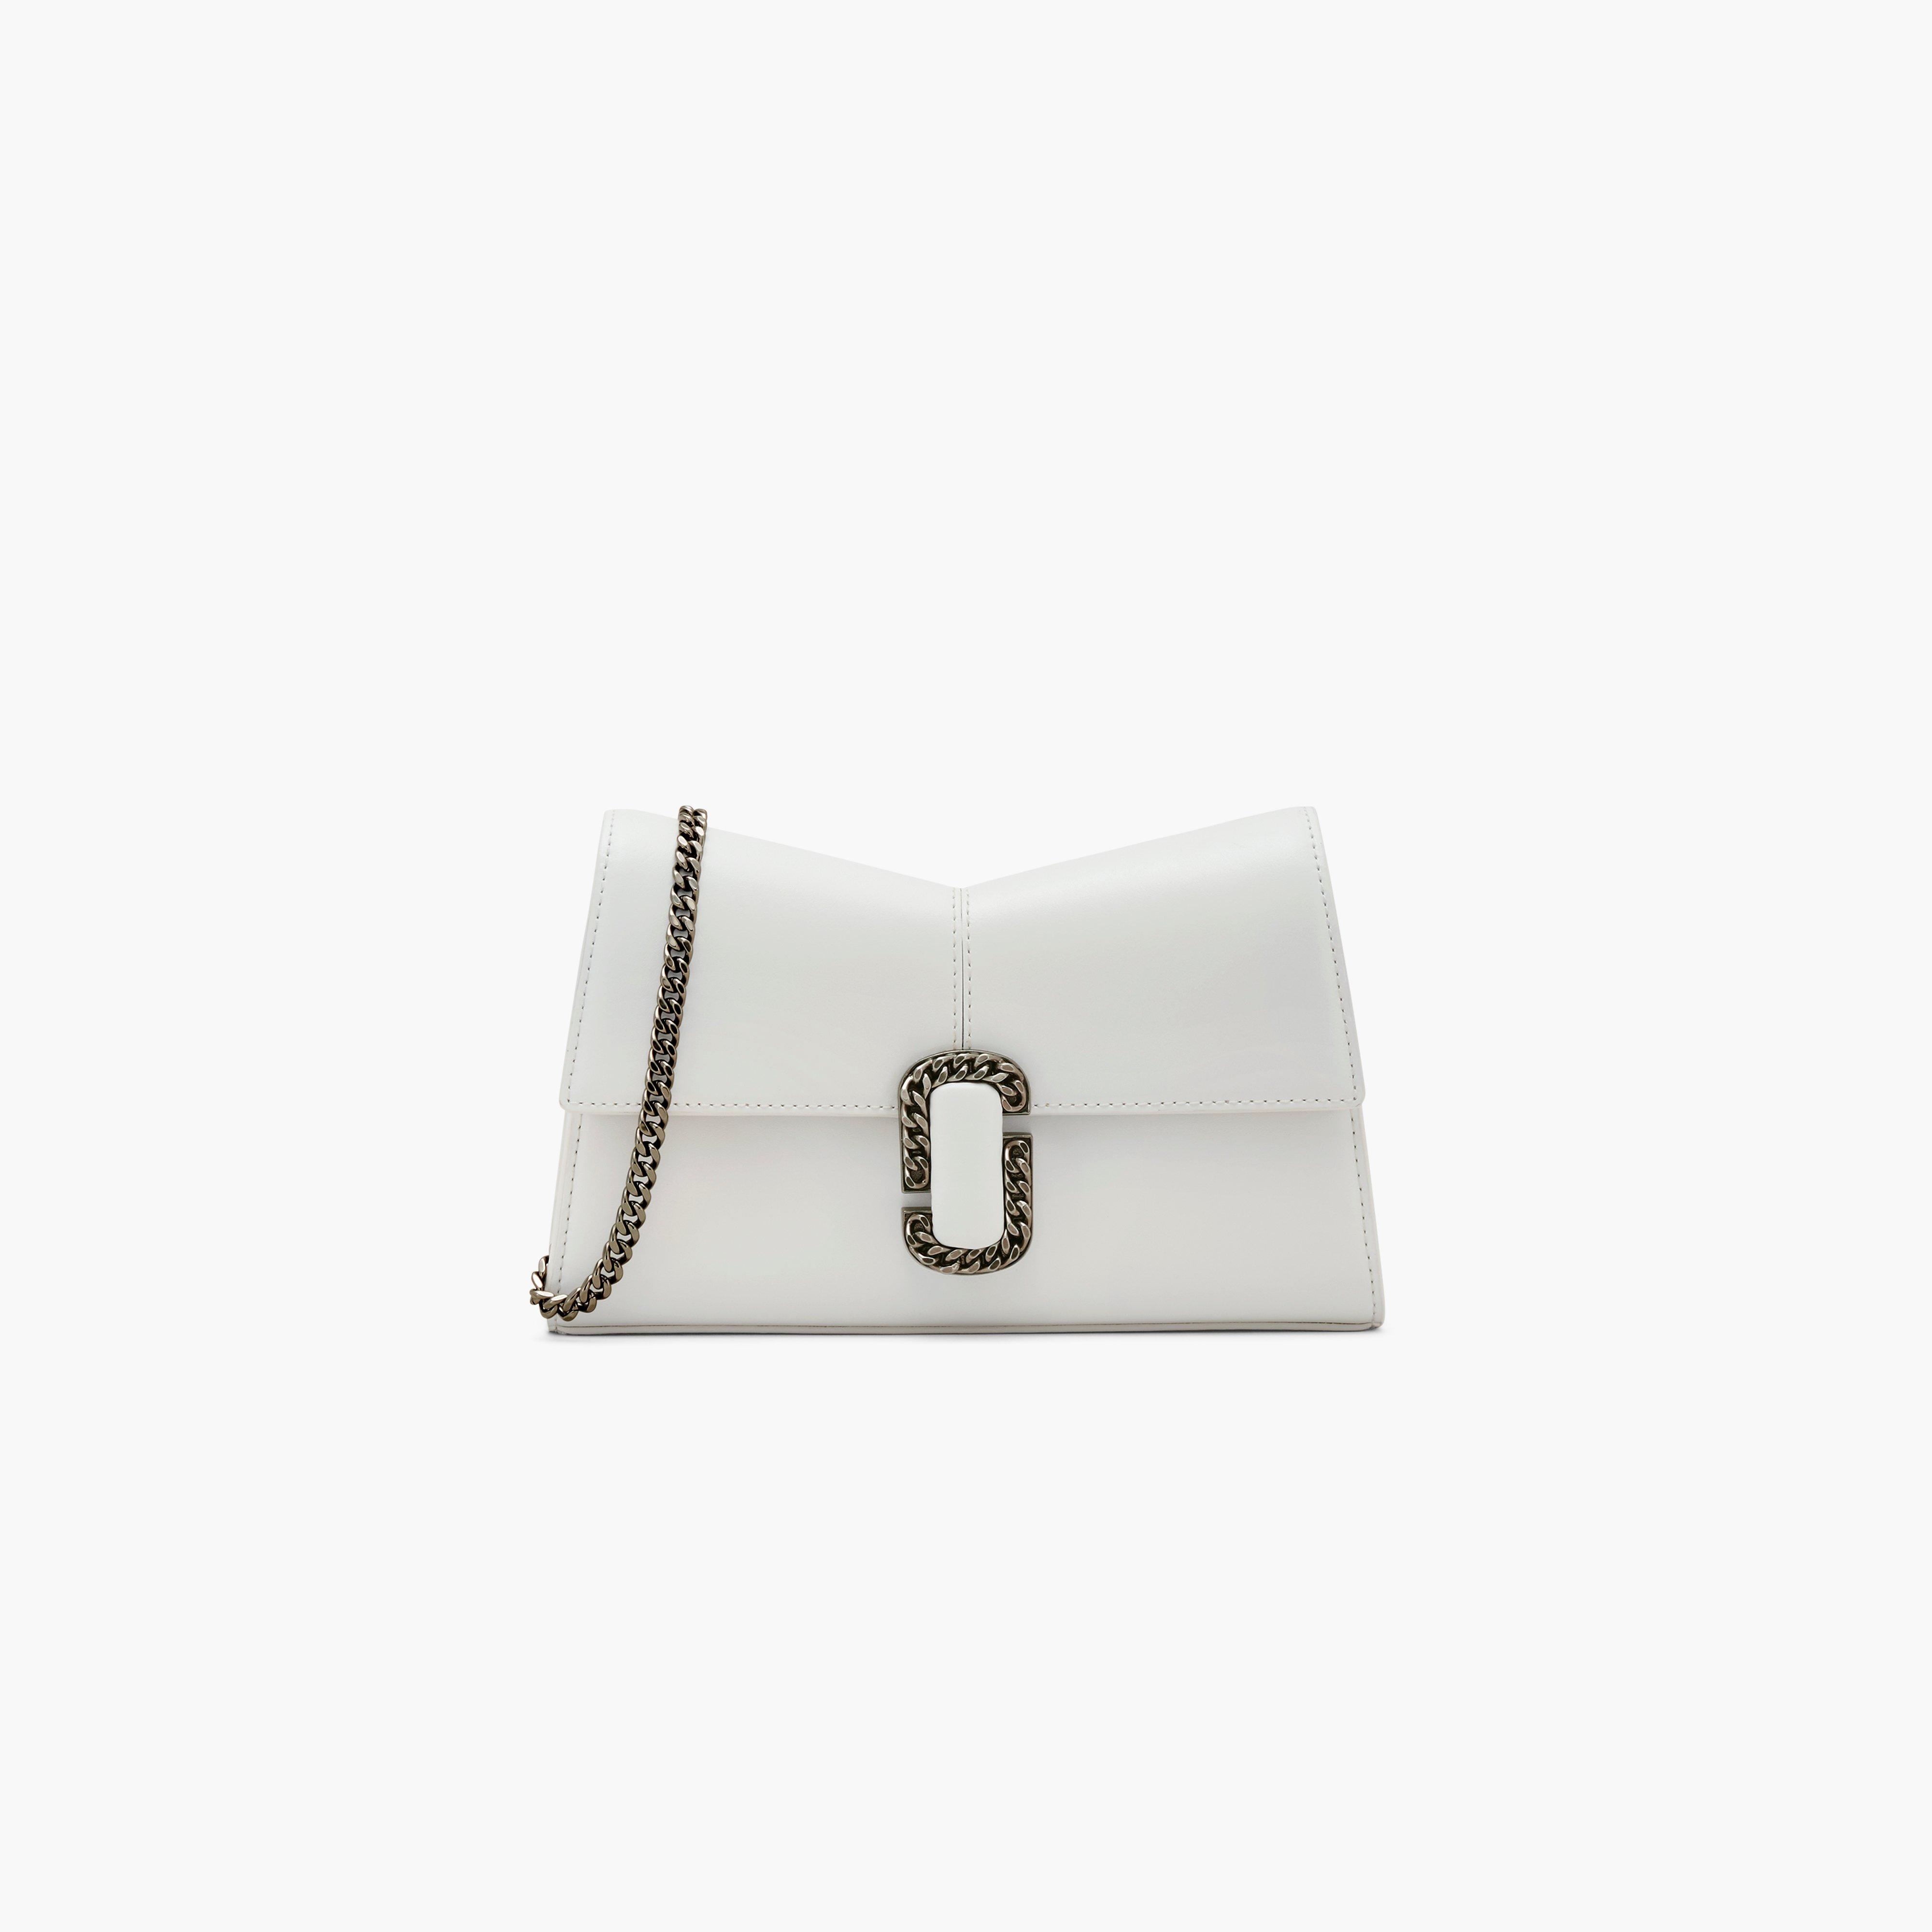 THE ST. MARC CHAIN WALLET - 1